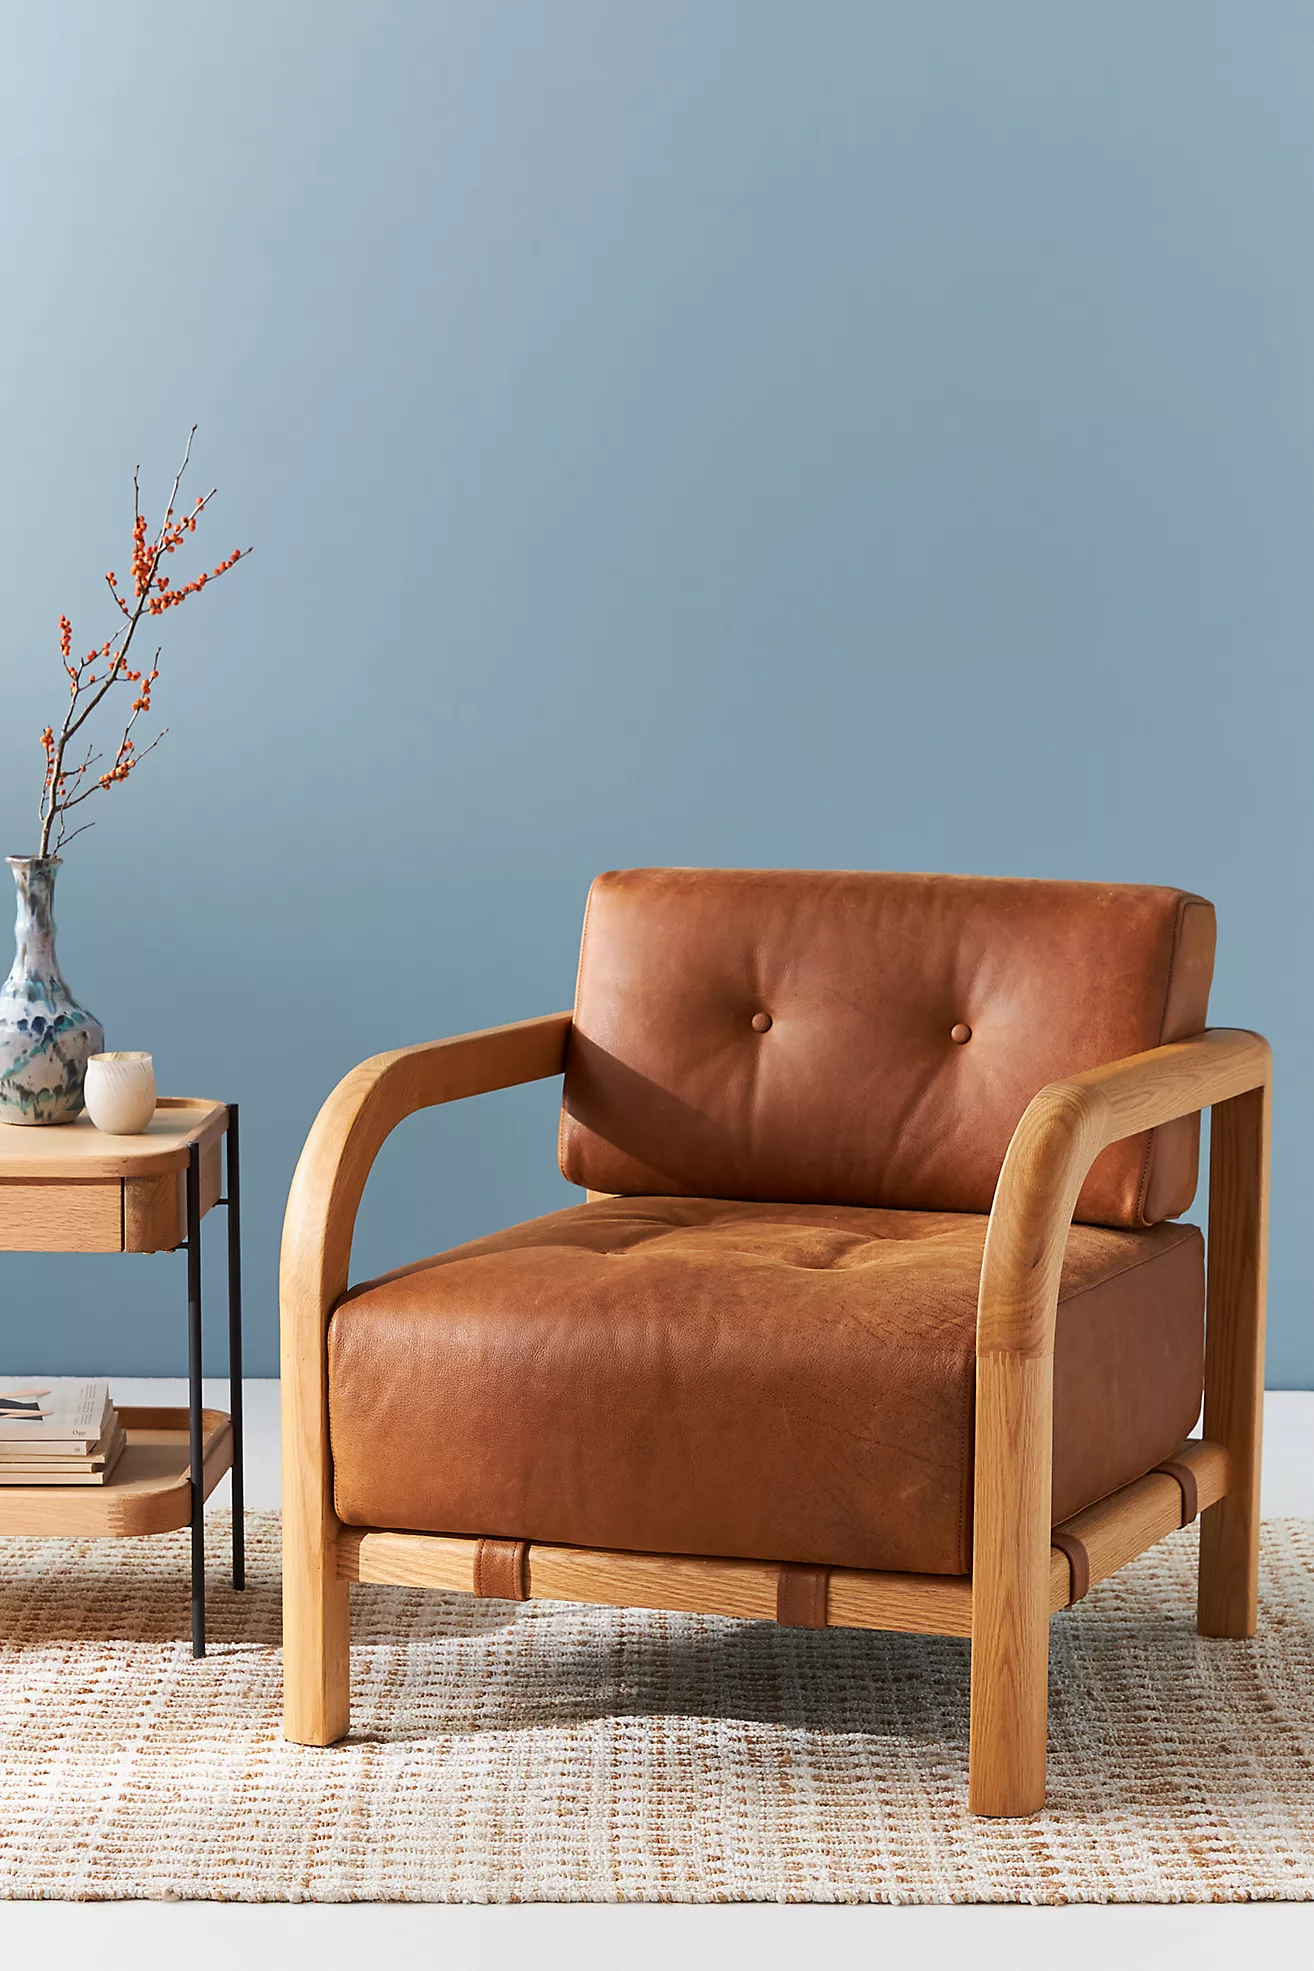 Warm Up Your Room with a Leather Chair